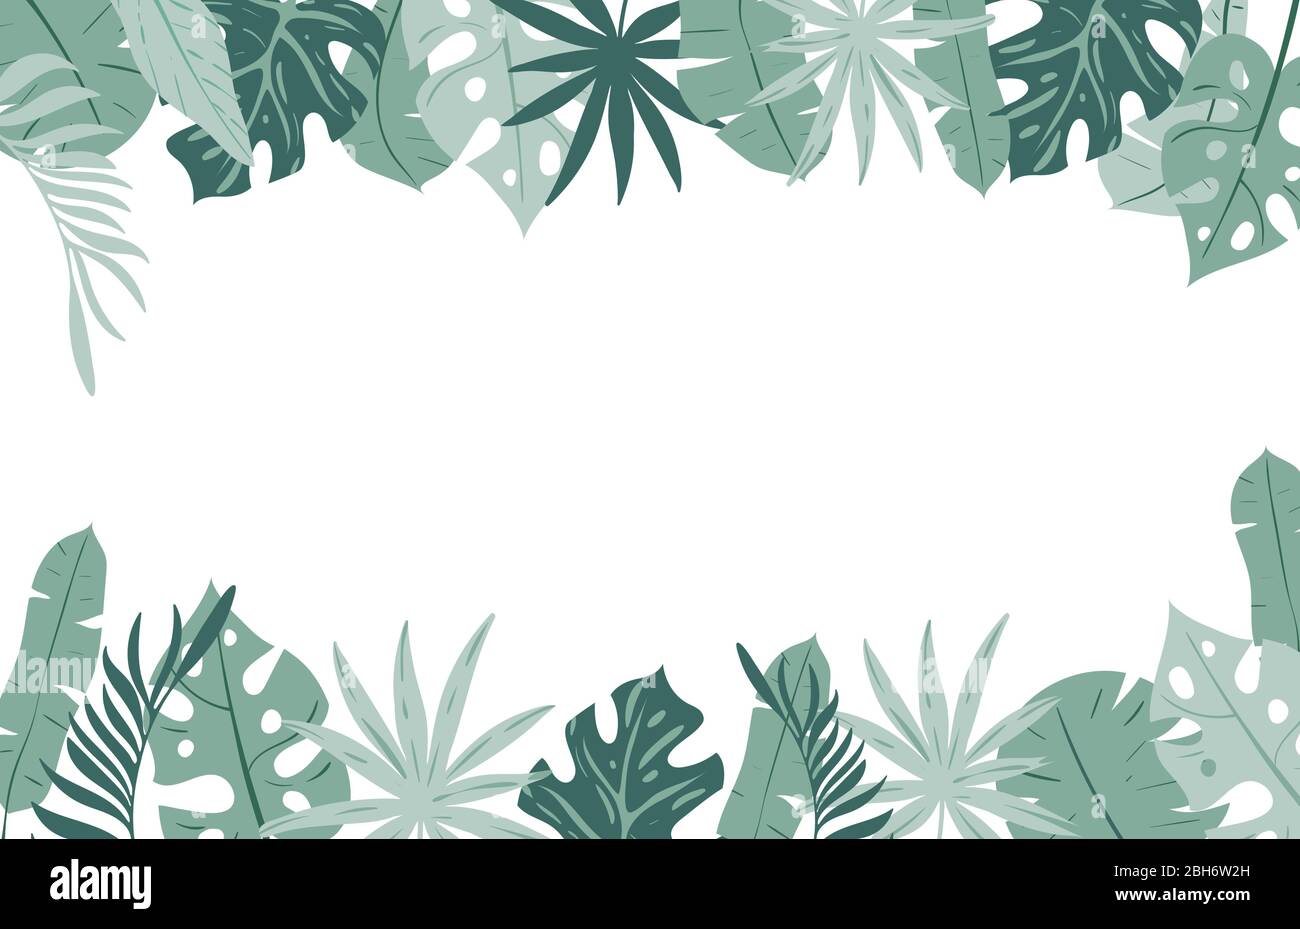 Jungle background. Tropical leaves frame. Rainforest foliage plants, green grass trees. Paradise african wildlife jungle vector frame on white. Stock Vector